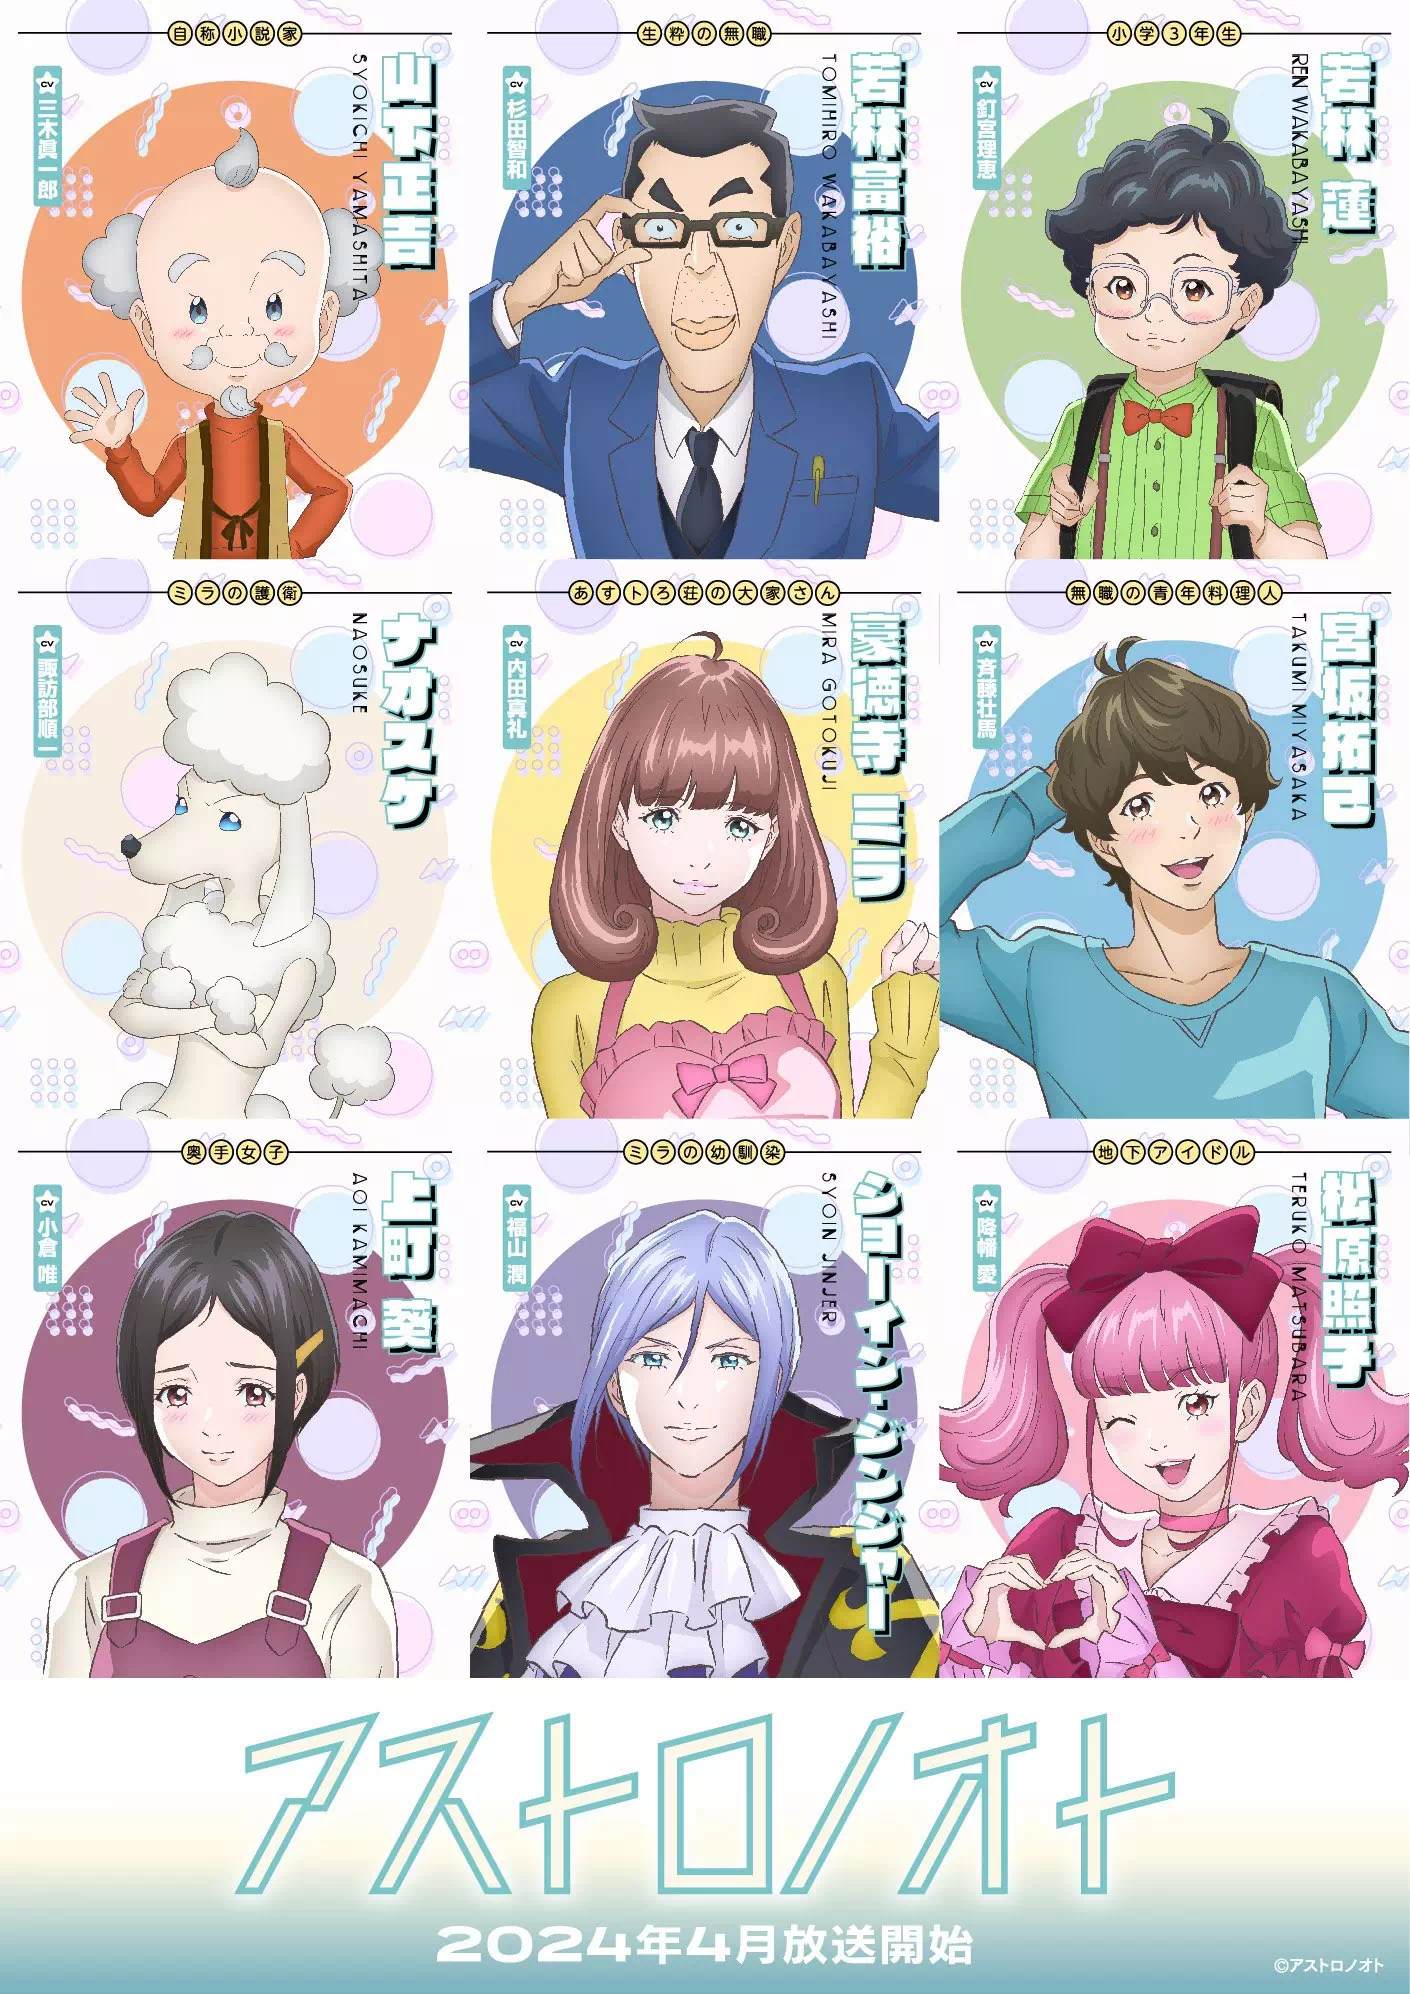 Astro note personnages